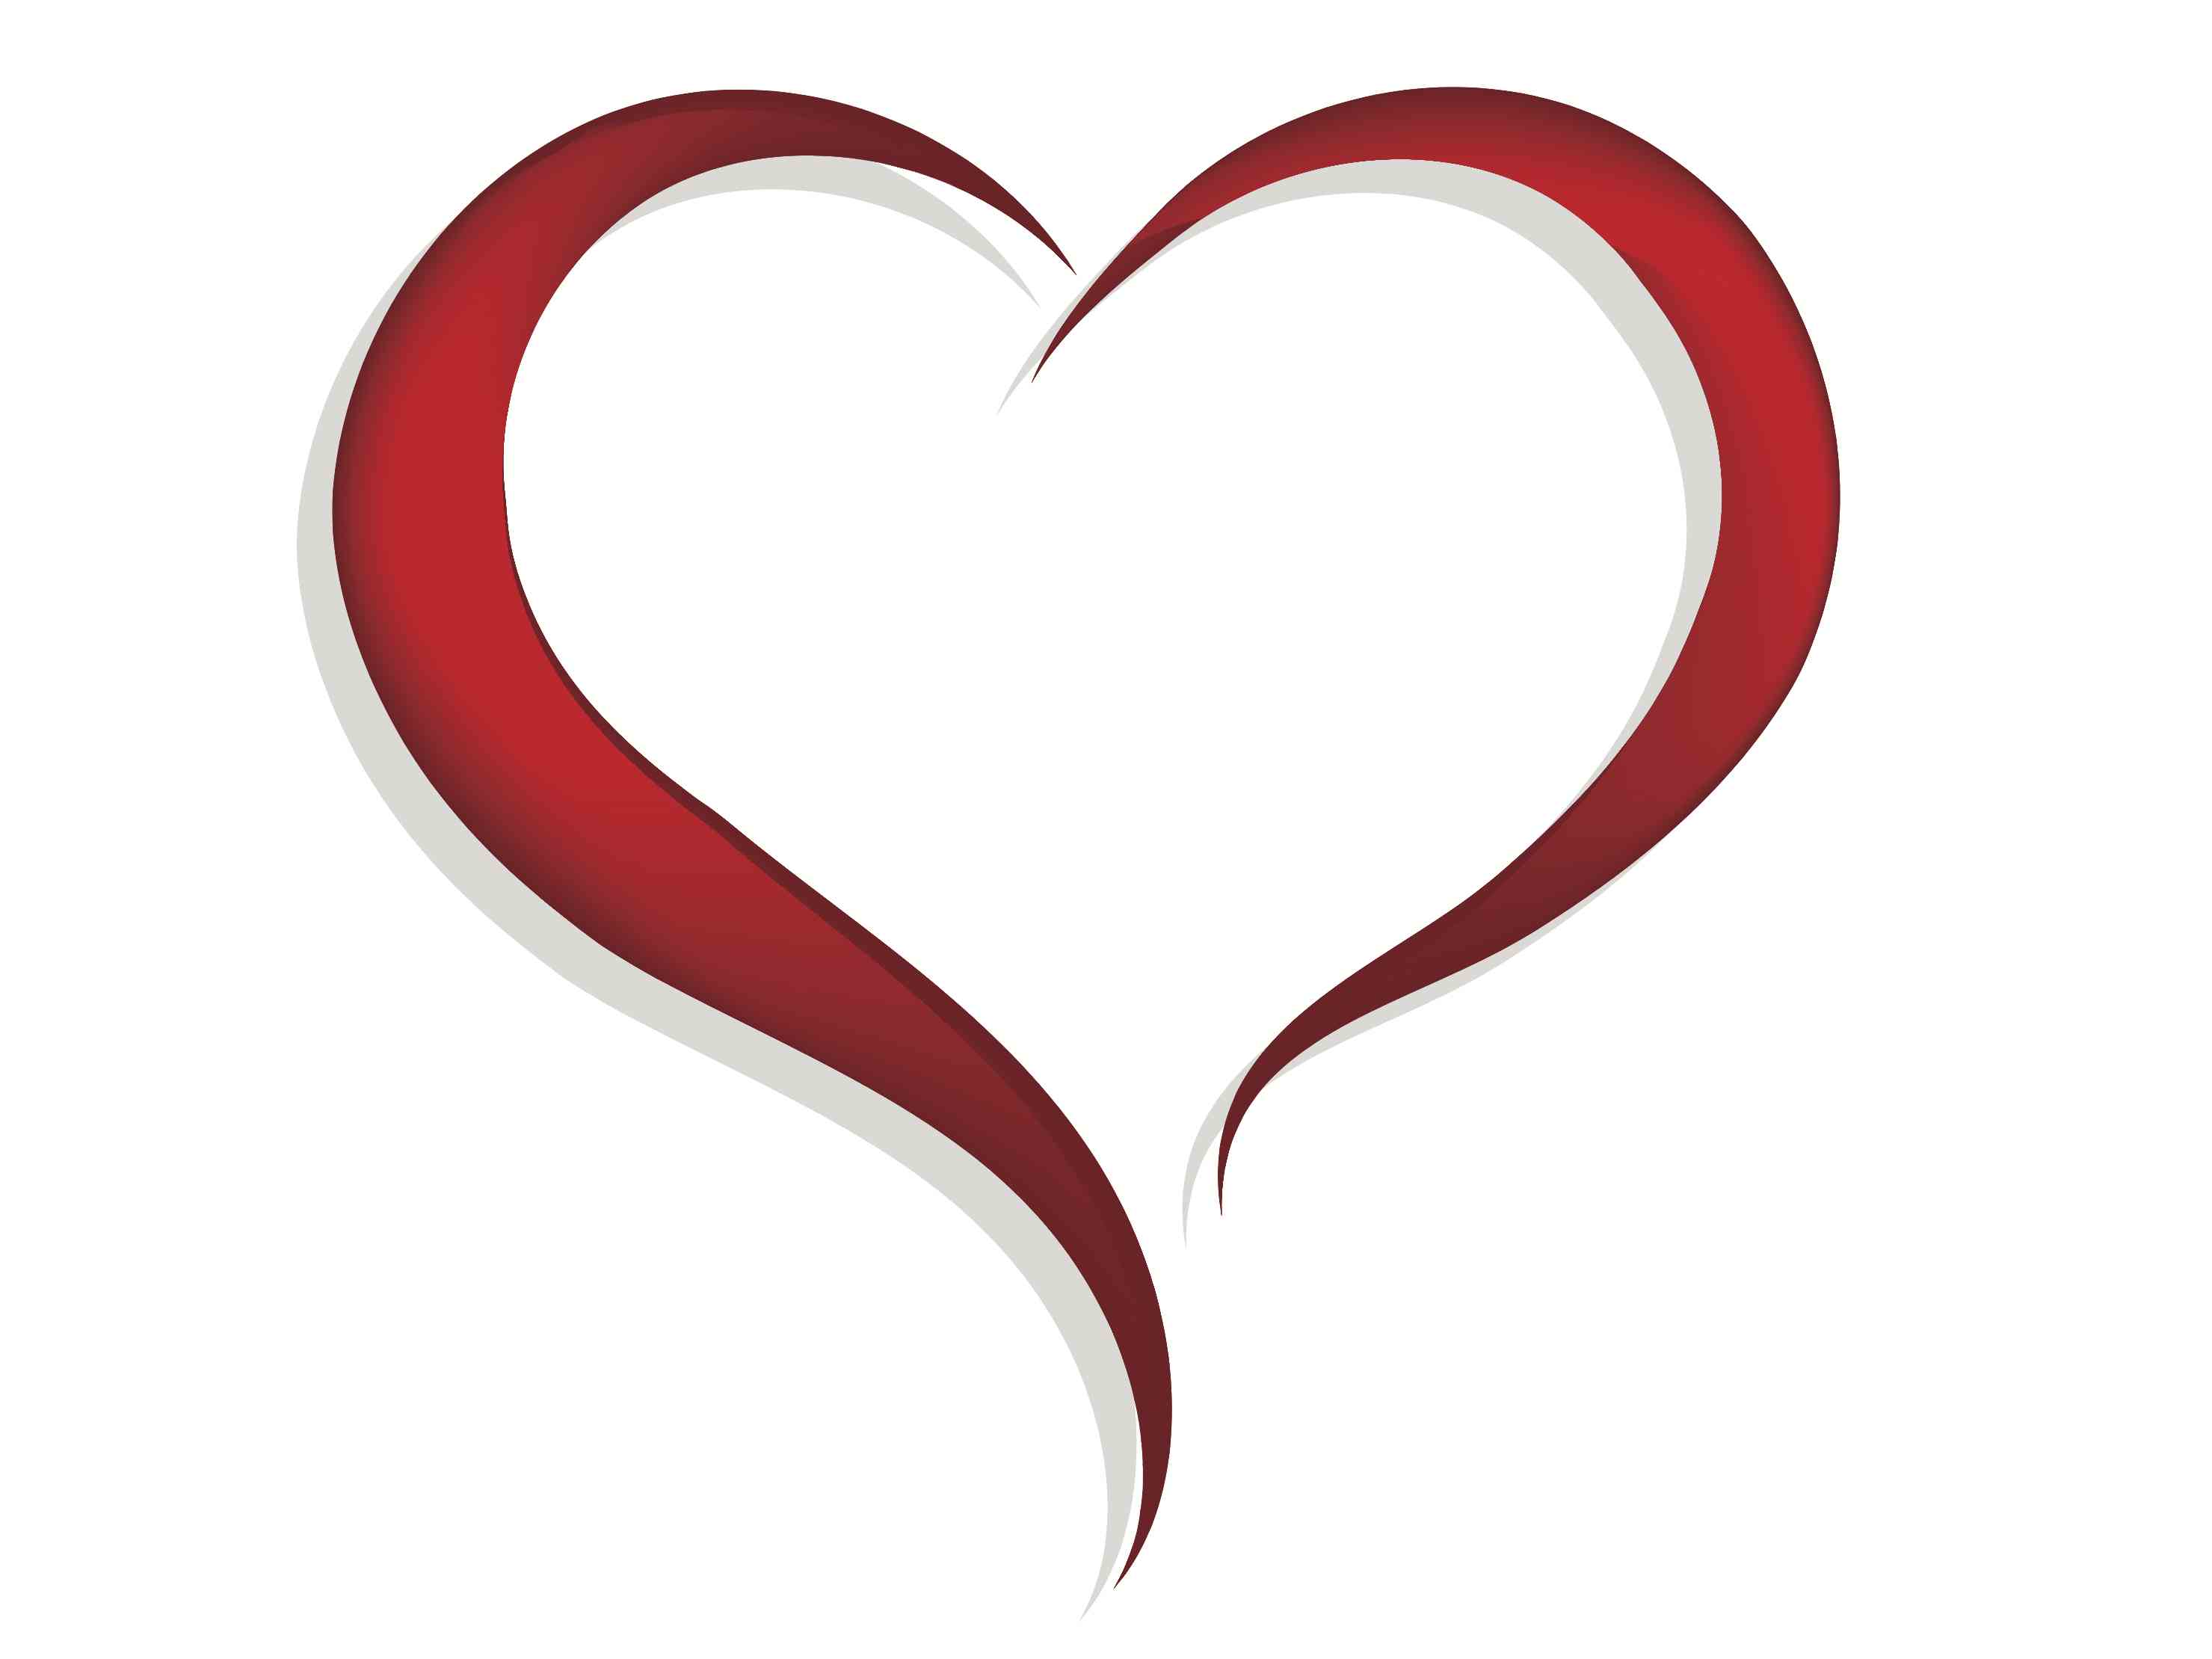 Heart Free Images at vector clip art online